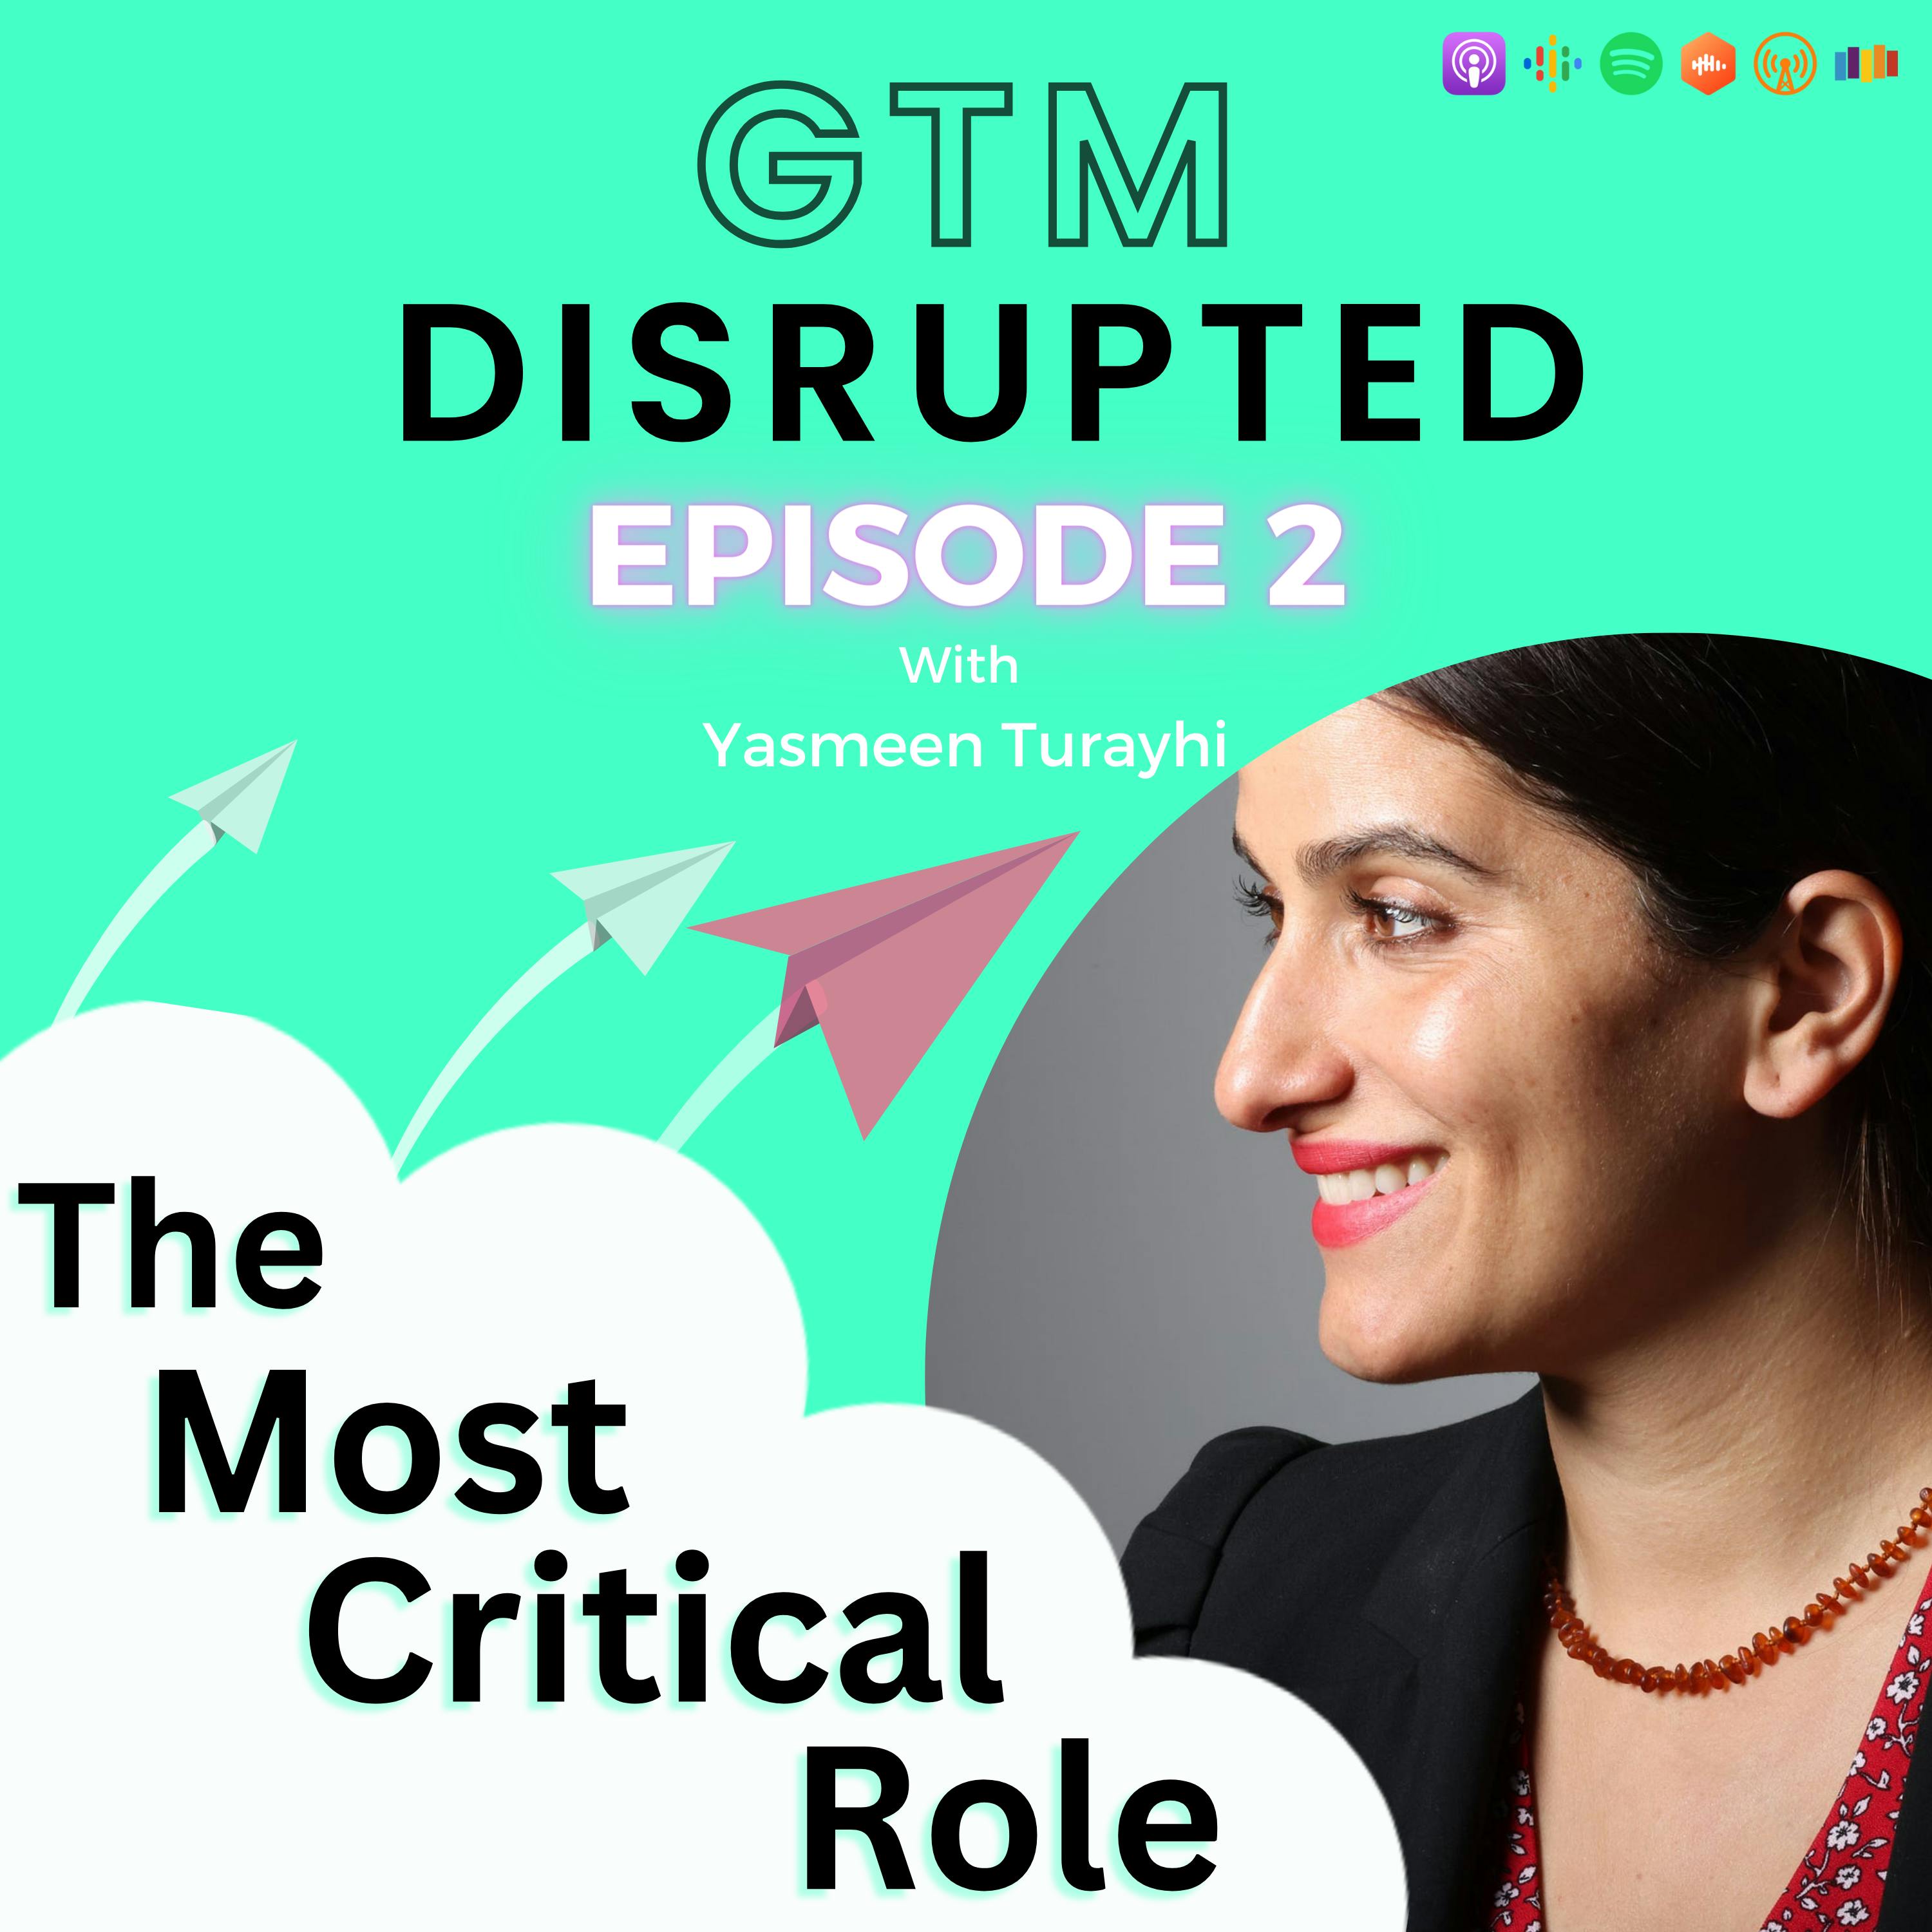 Exploring the most critical role in GTM; Product Marketing with Yasmeen Turayhi